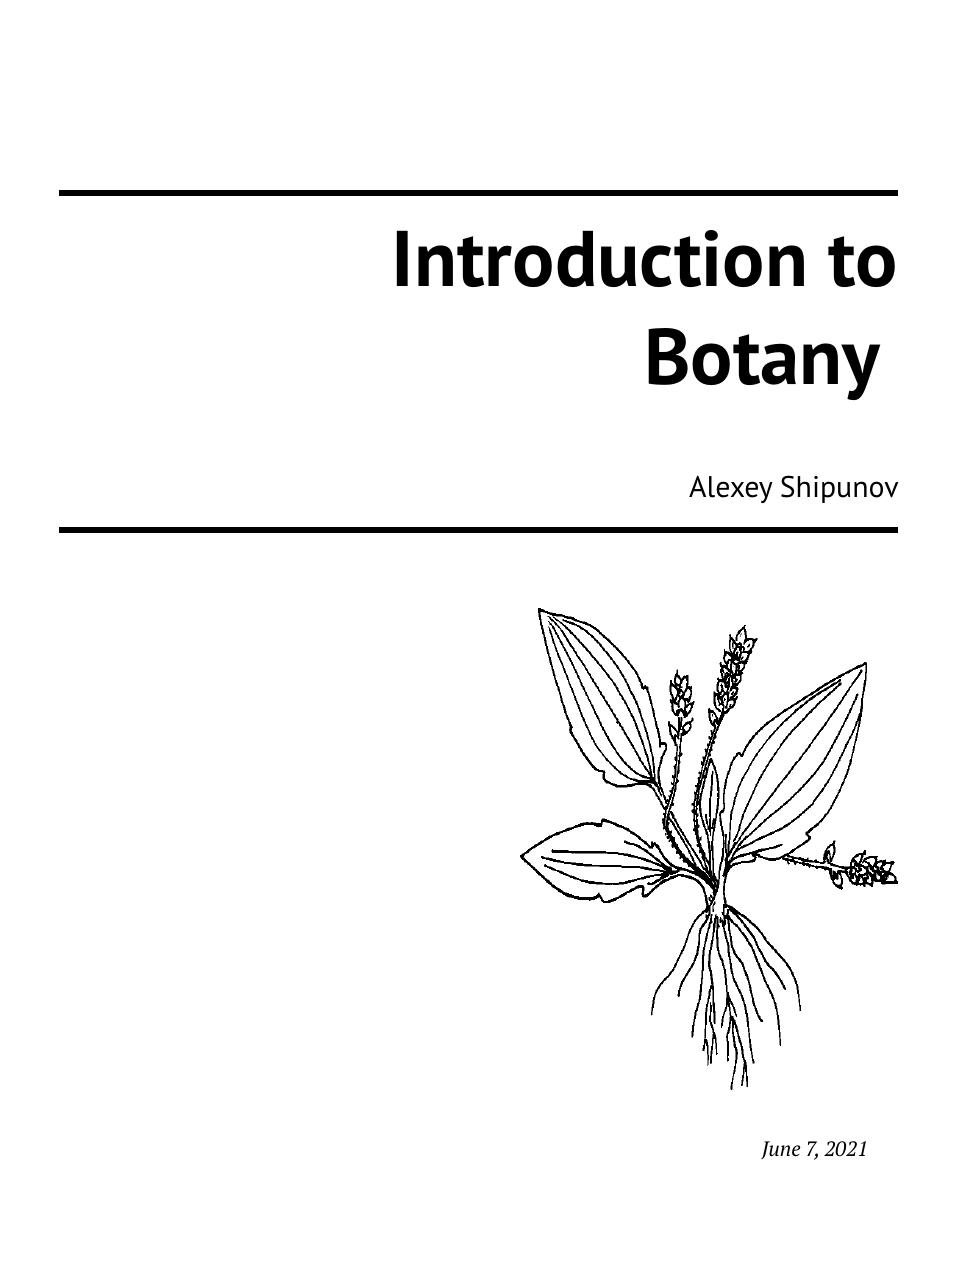 Introduction to Botany, 2021